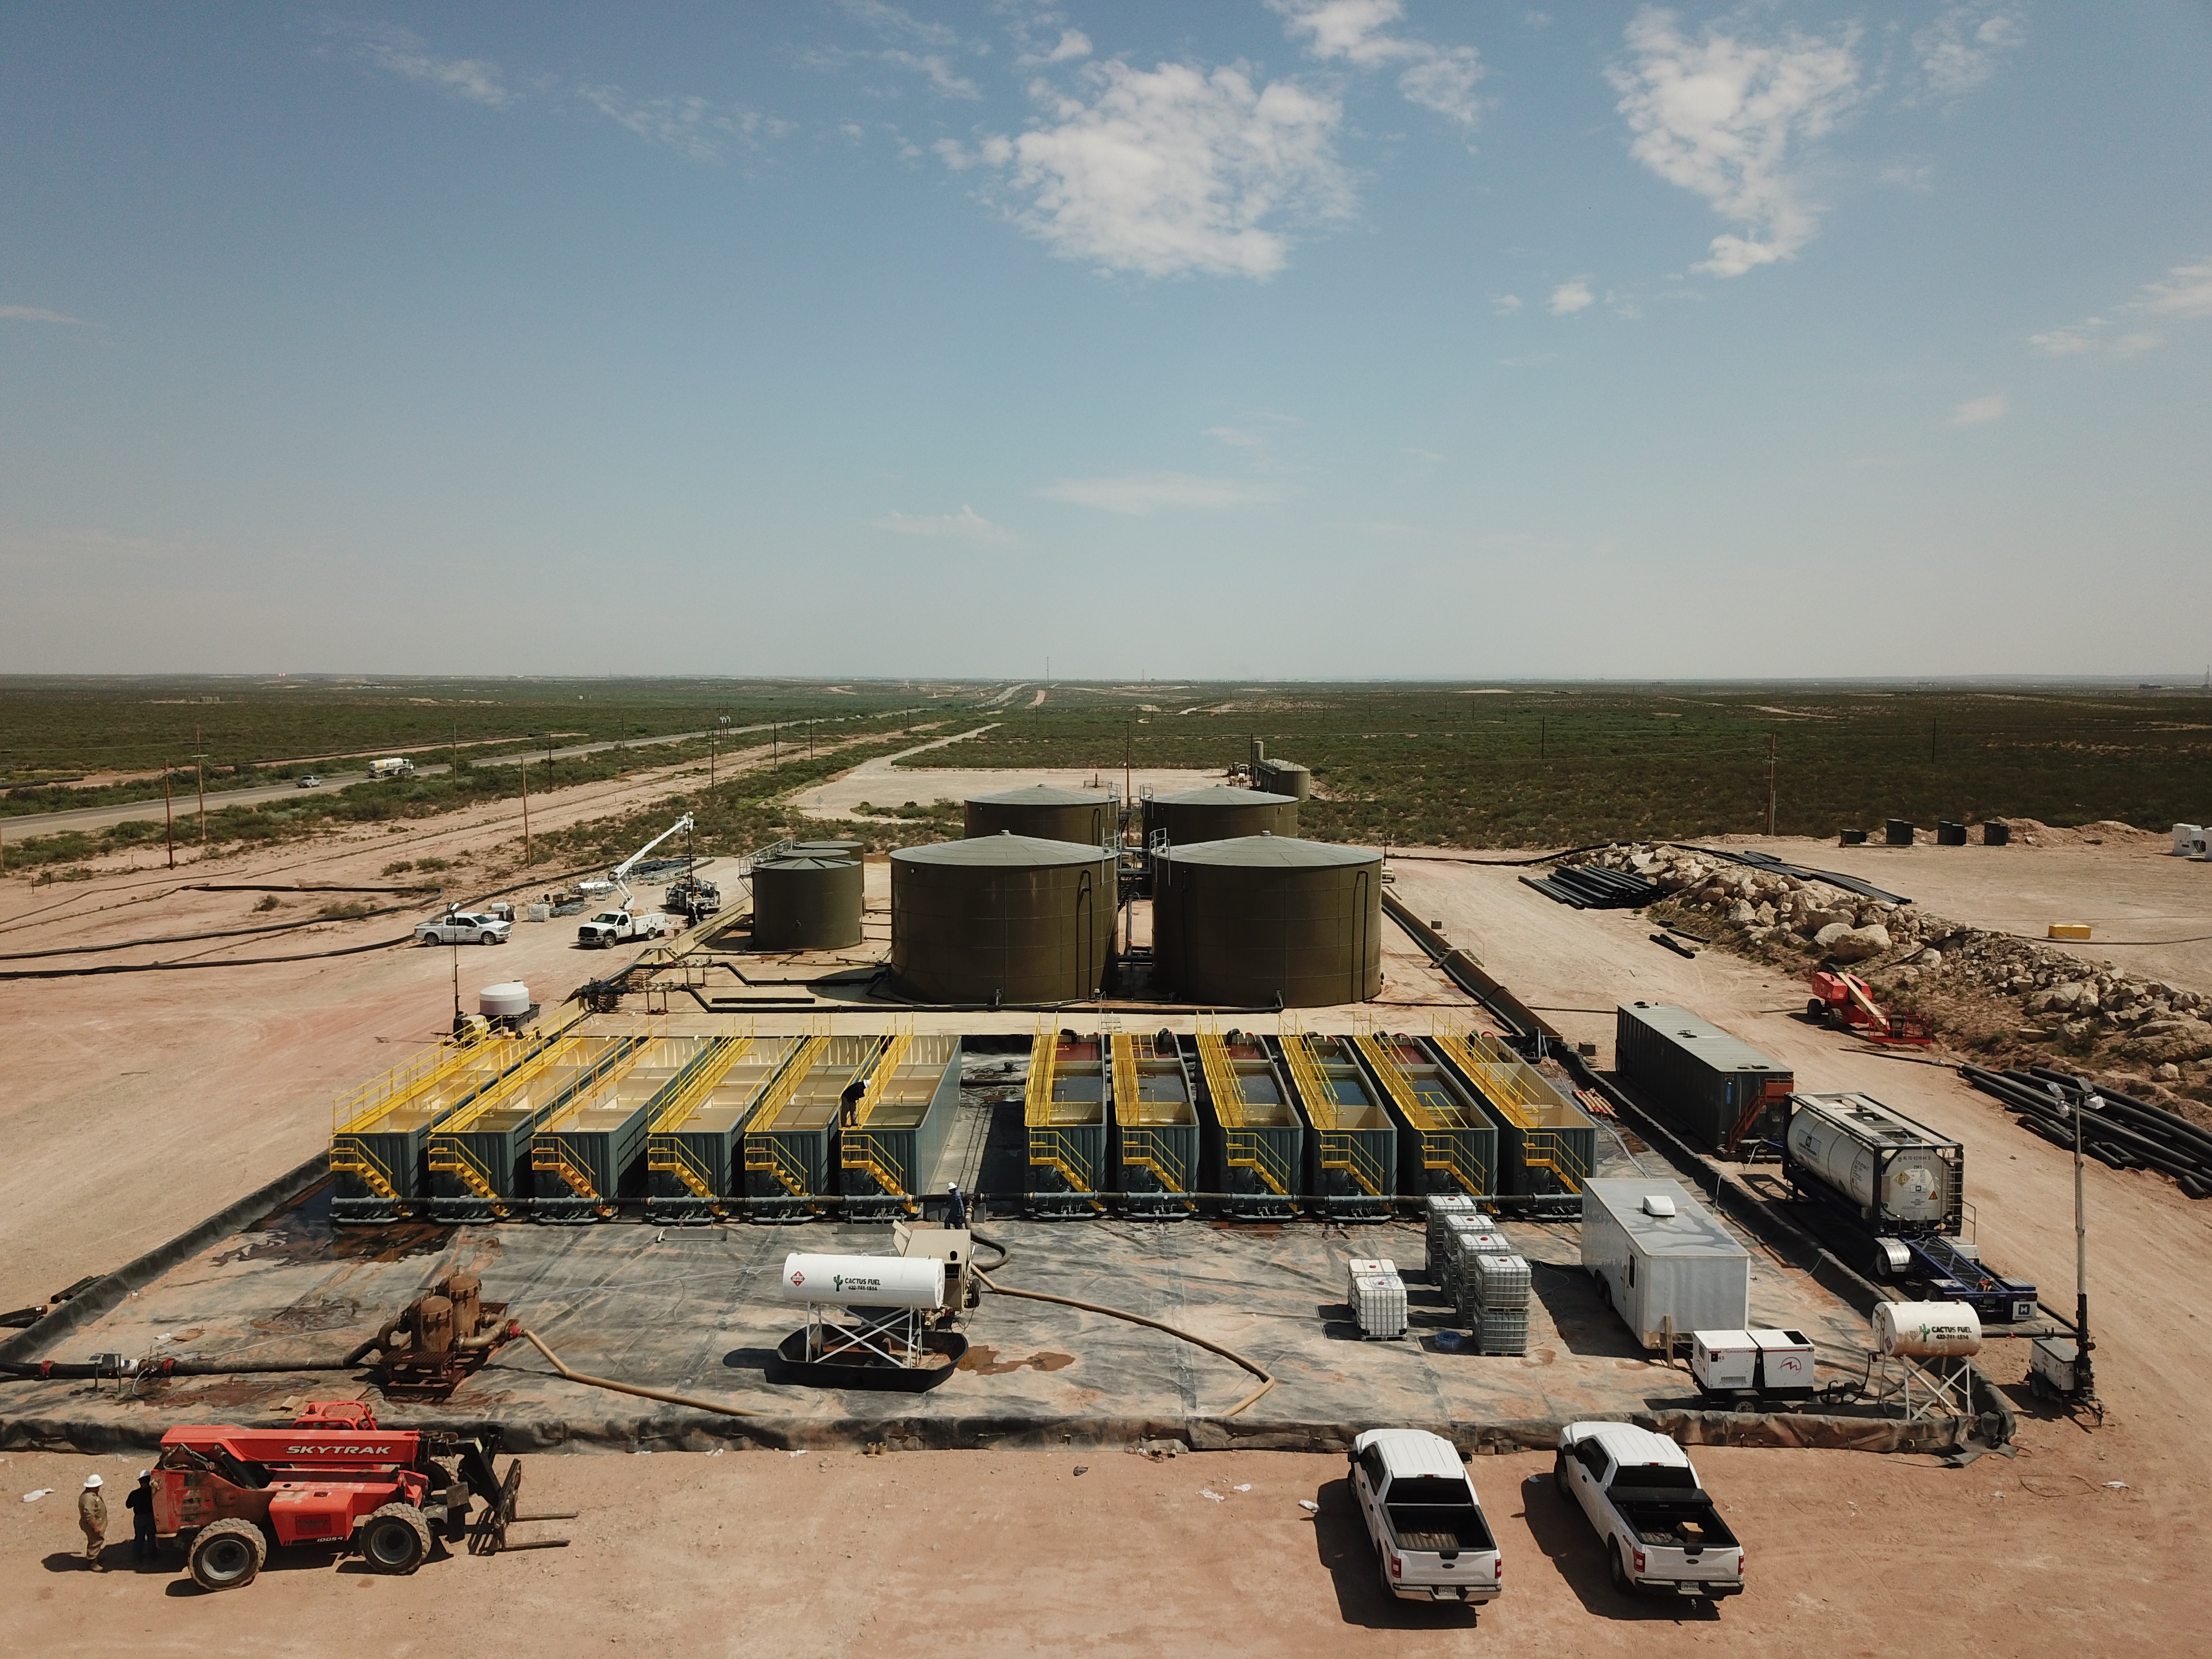 Solaris’ Lobo Ranch water recycling plant came online in July. (Source: Solaris Water Midstream)